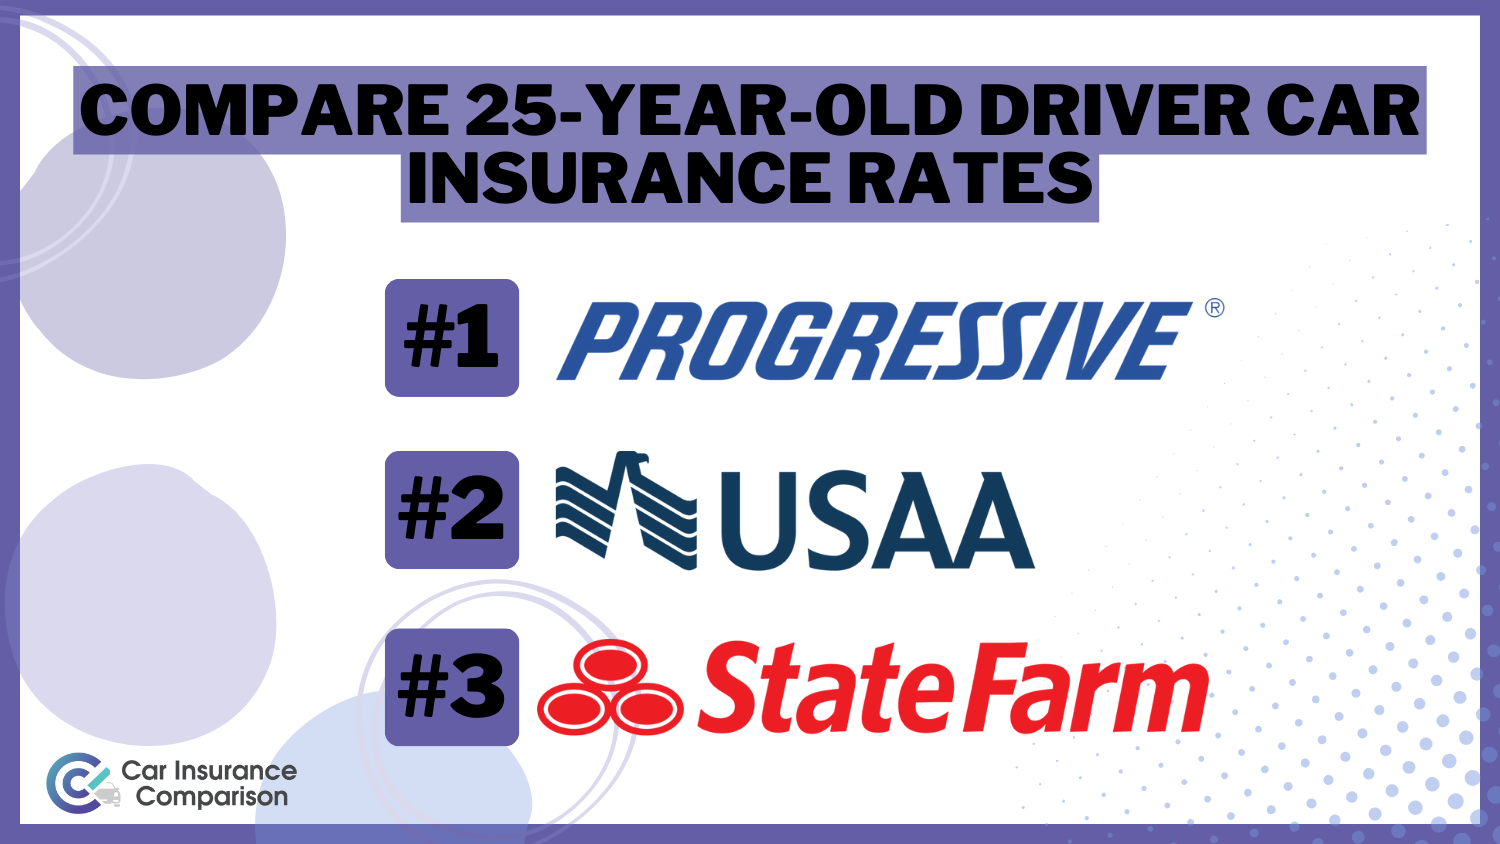 Compare-25-Year-Old-Driver-Car-Insurance-Rates: Progressive, USAA, and State Farm.